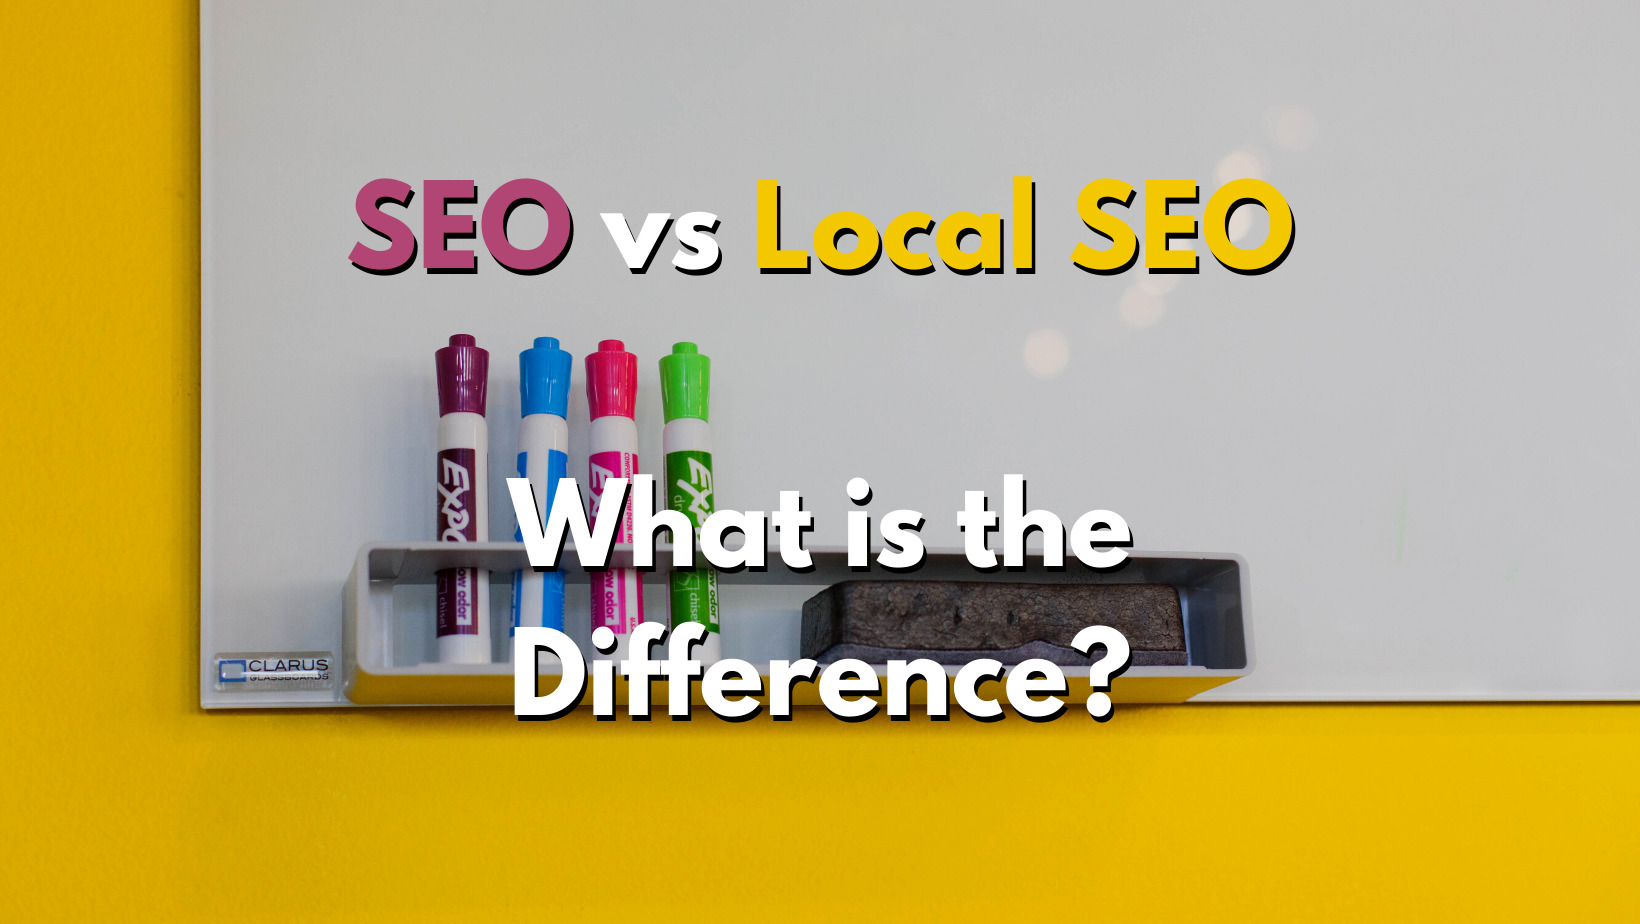 A blank whiteboard with markers and an eraser. The words "SEO vs Local SEO - what is the difference?" is imposed on it.